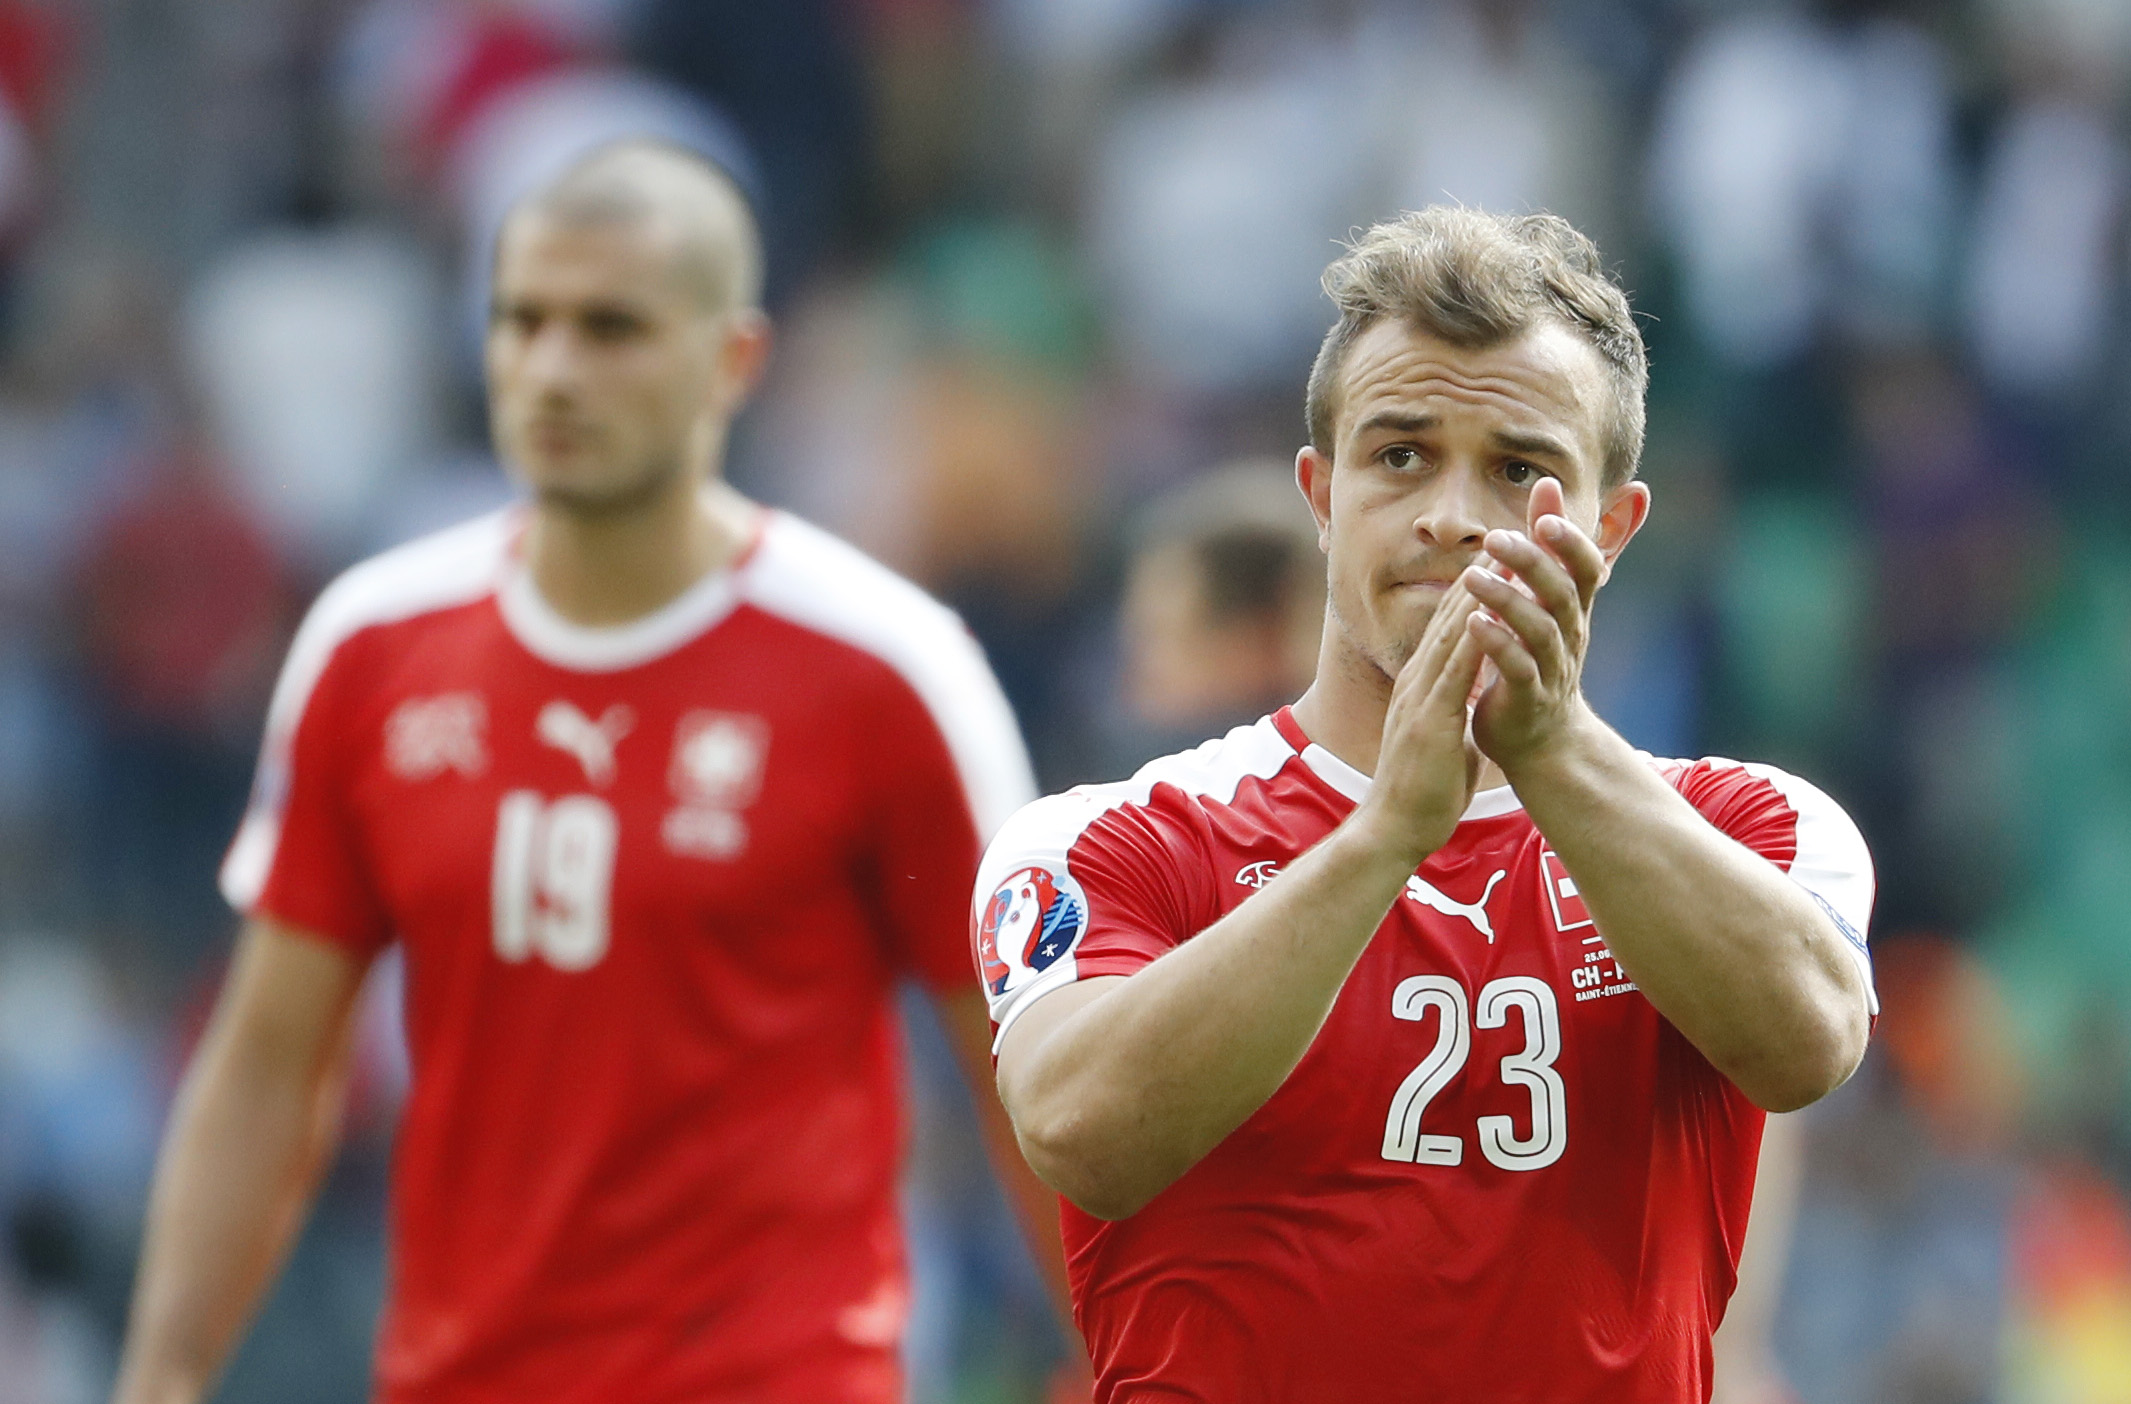 Football Soccer - Switzerland v Poland - EURO 2016 - Round of 16 - Stade Geoffroy-Guichard, Saint-�tienne, France - 25/6/16 Switzerland's Xherdan Shaqiri applauds fans after losing the penalty shootout REUTERS/Yves Herman Livepic